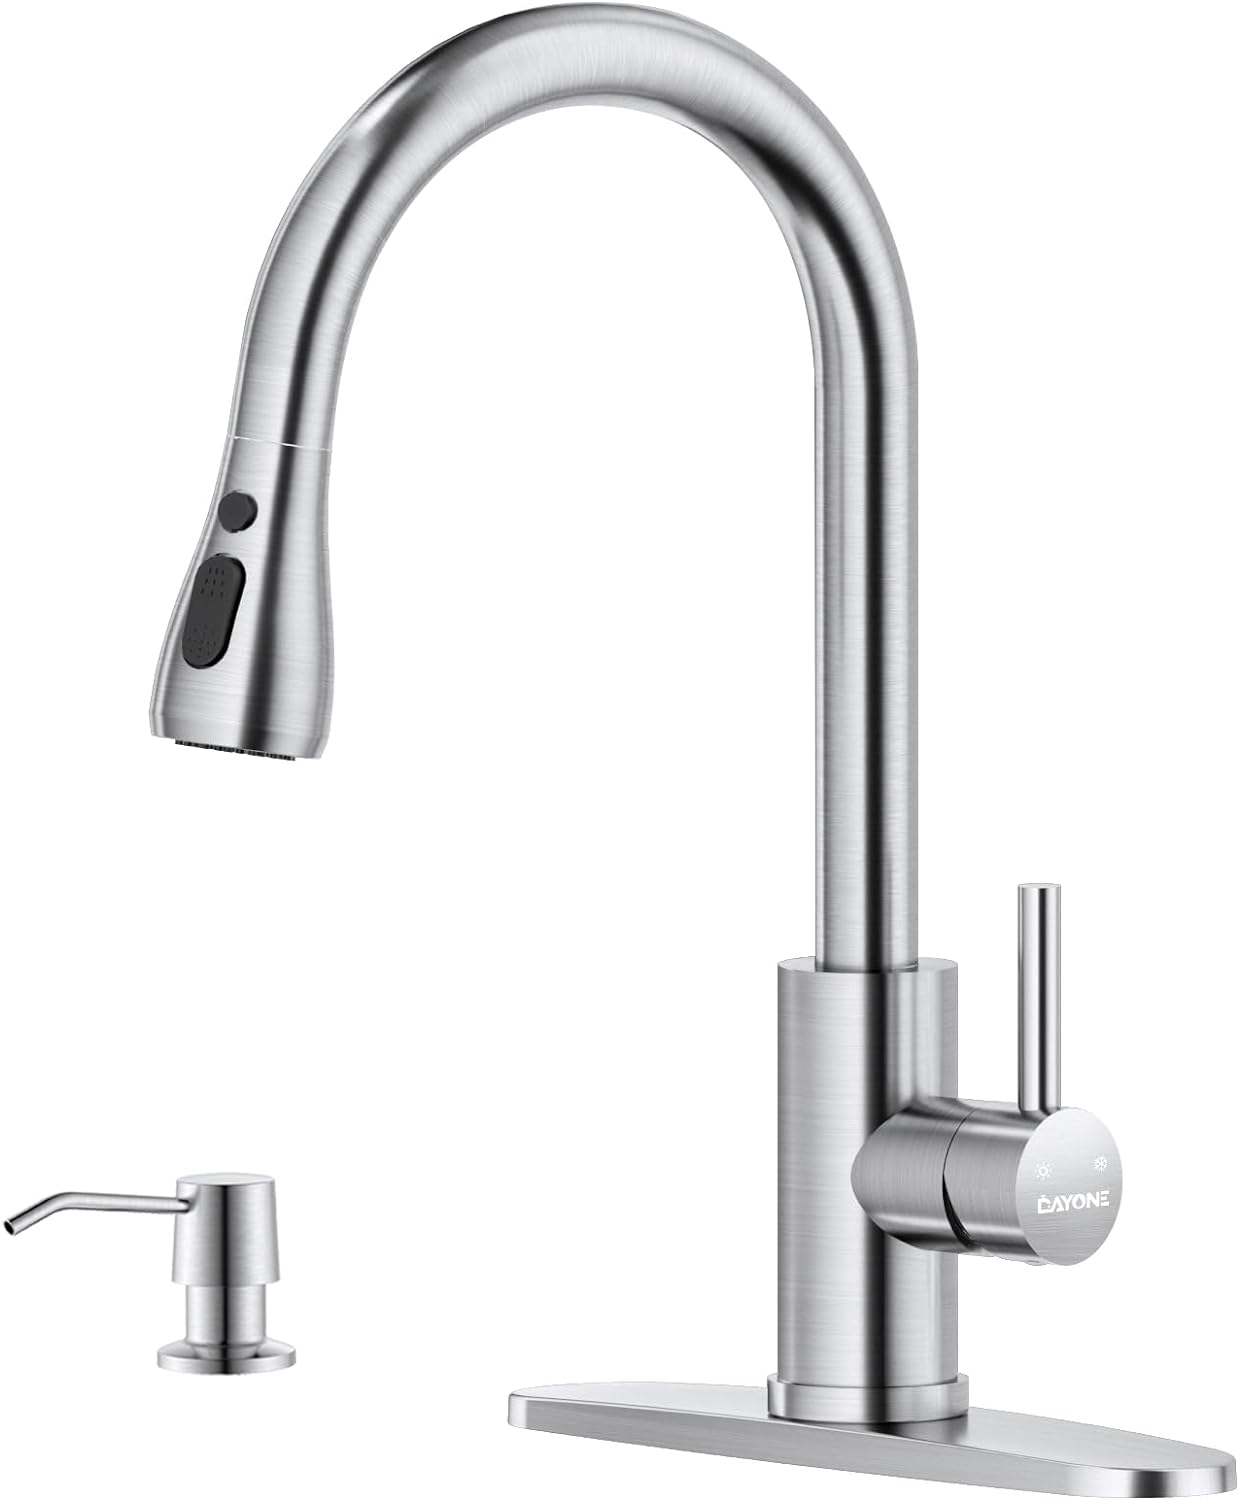 DAYONE Brushed Nickel Kitchen Faucet with Pull Down Sprayer and Soap Dispenser, 3 Modes High Arc Single Handle Sink Faucet with Deck Plae for Kitchen, DAY-APS257BN